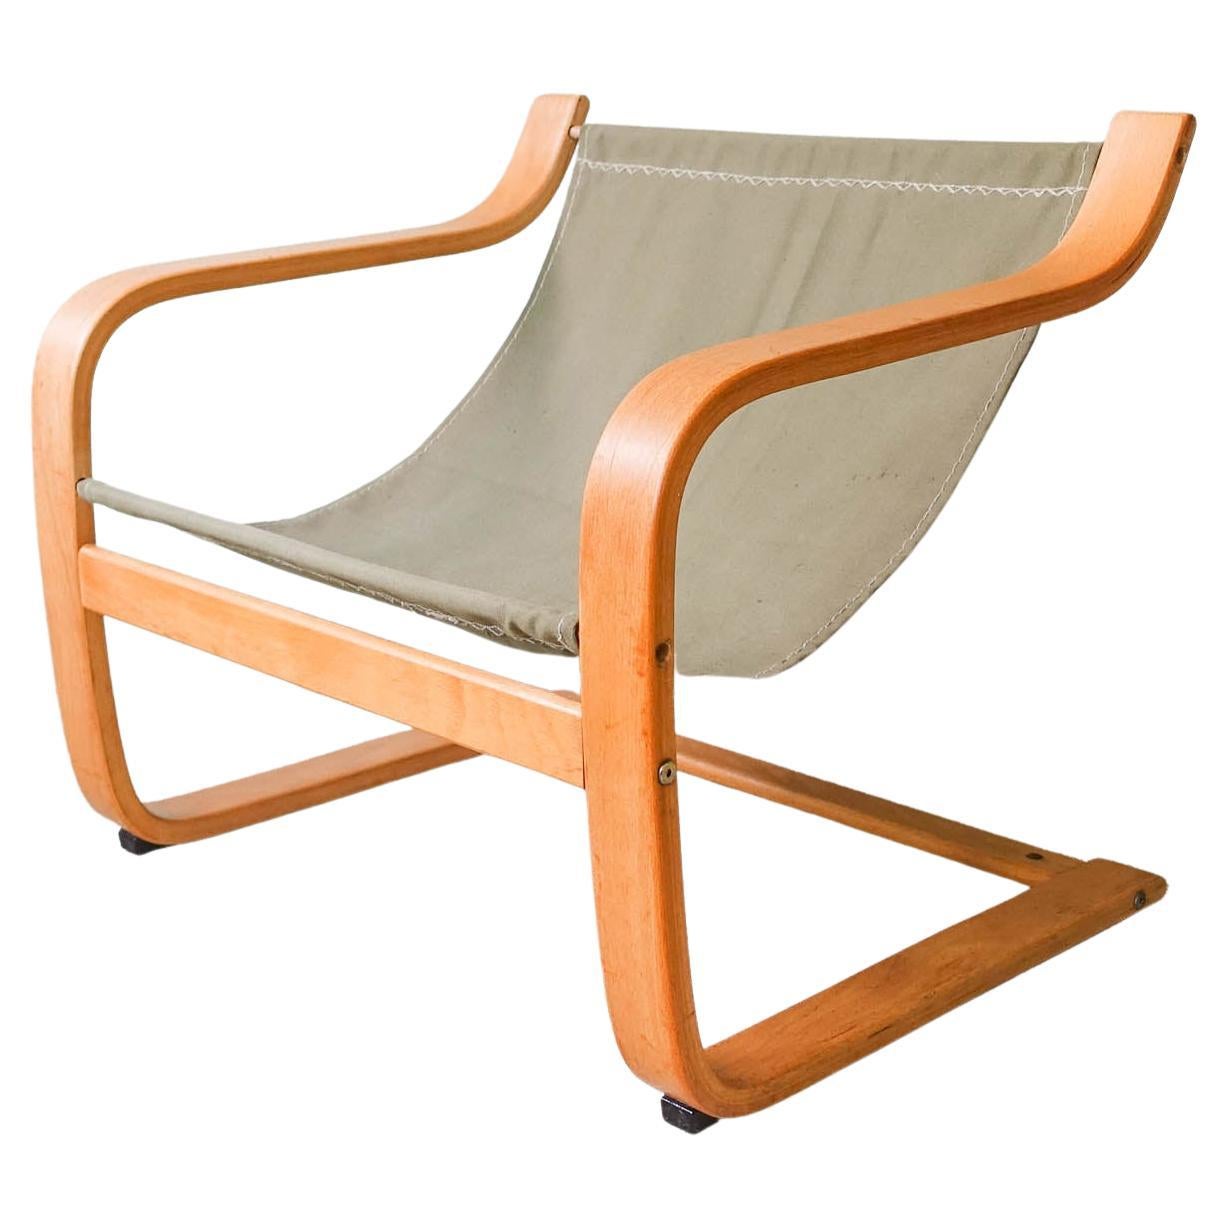 Welkom staart Lounge Vintage Ikea Lounge Chair, 1970's For Sale at 1stDibs